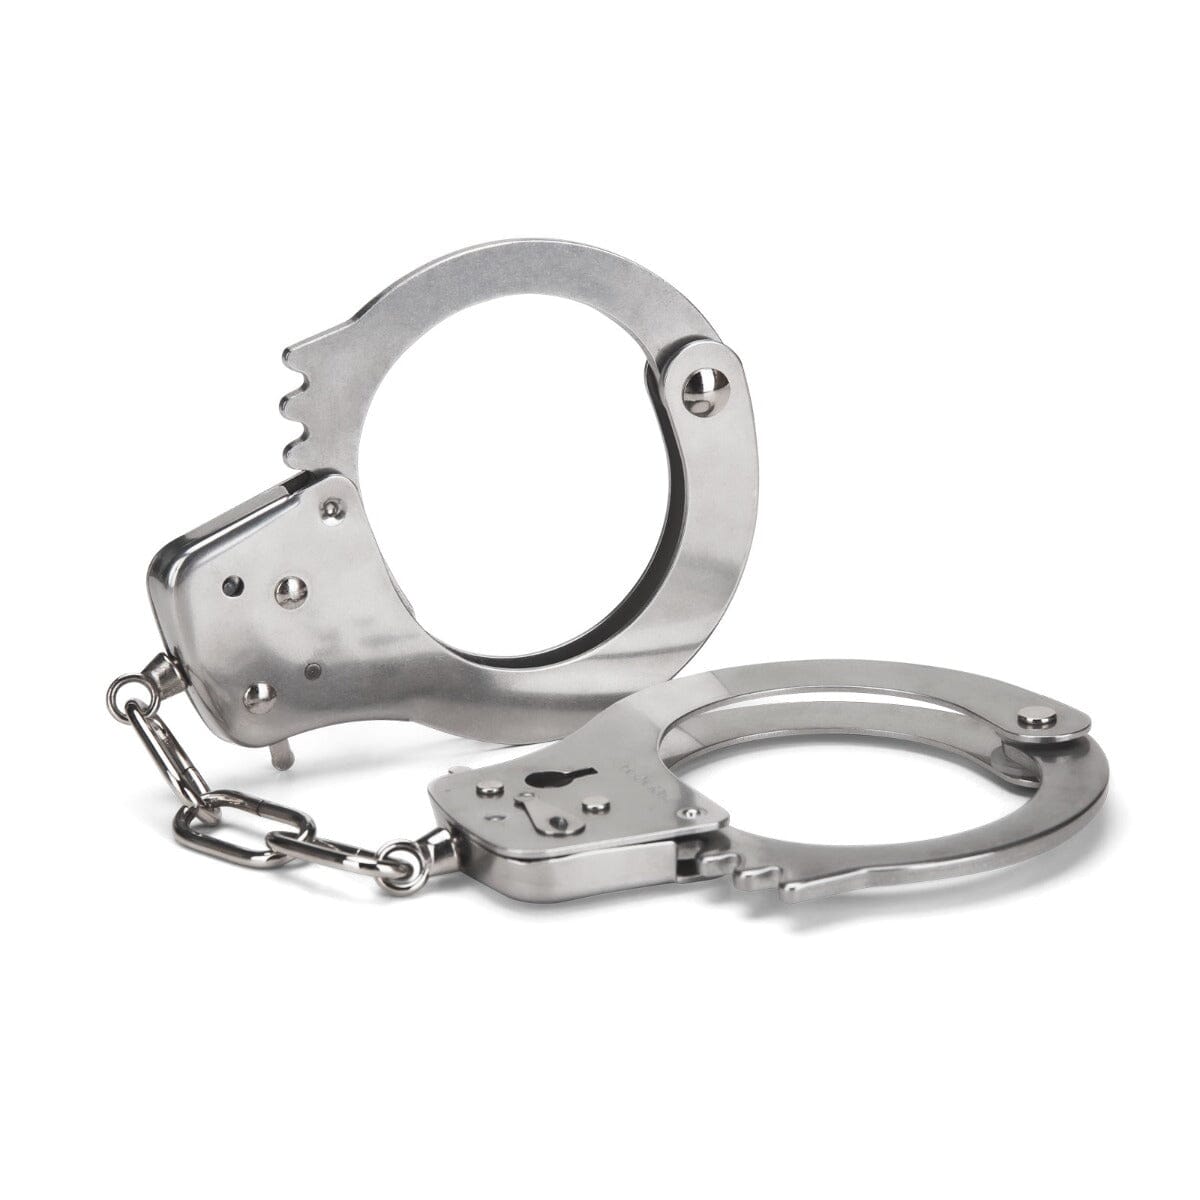 a pair of handcuffs on a white background